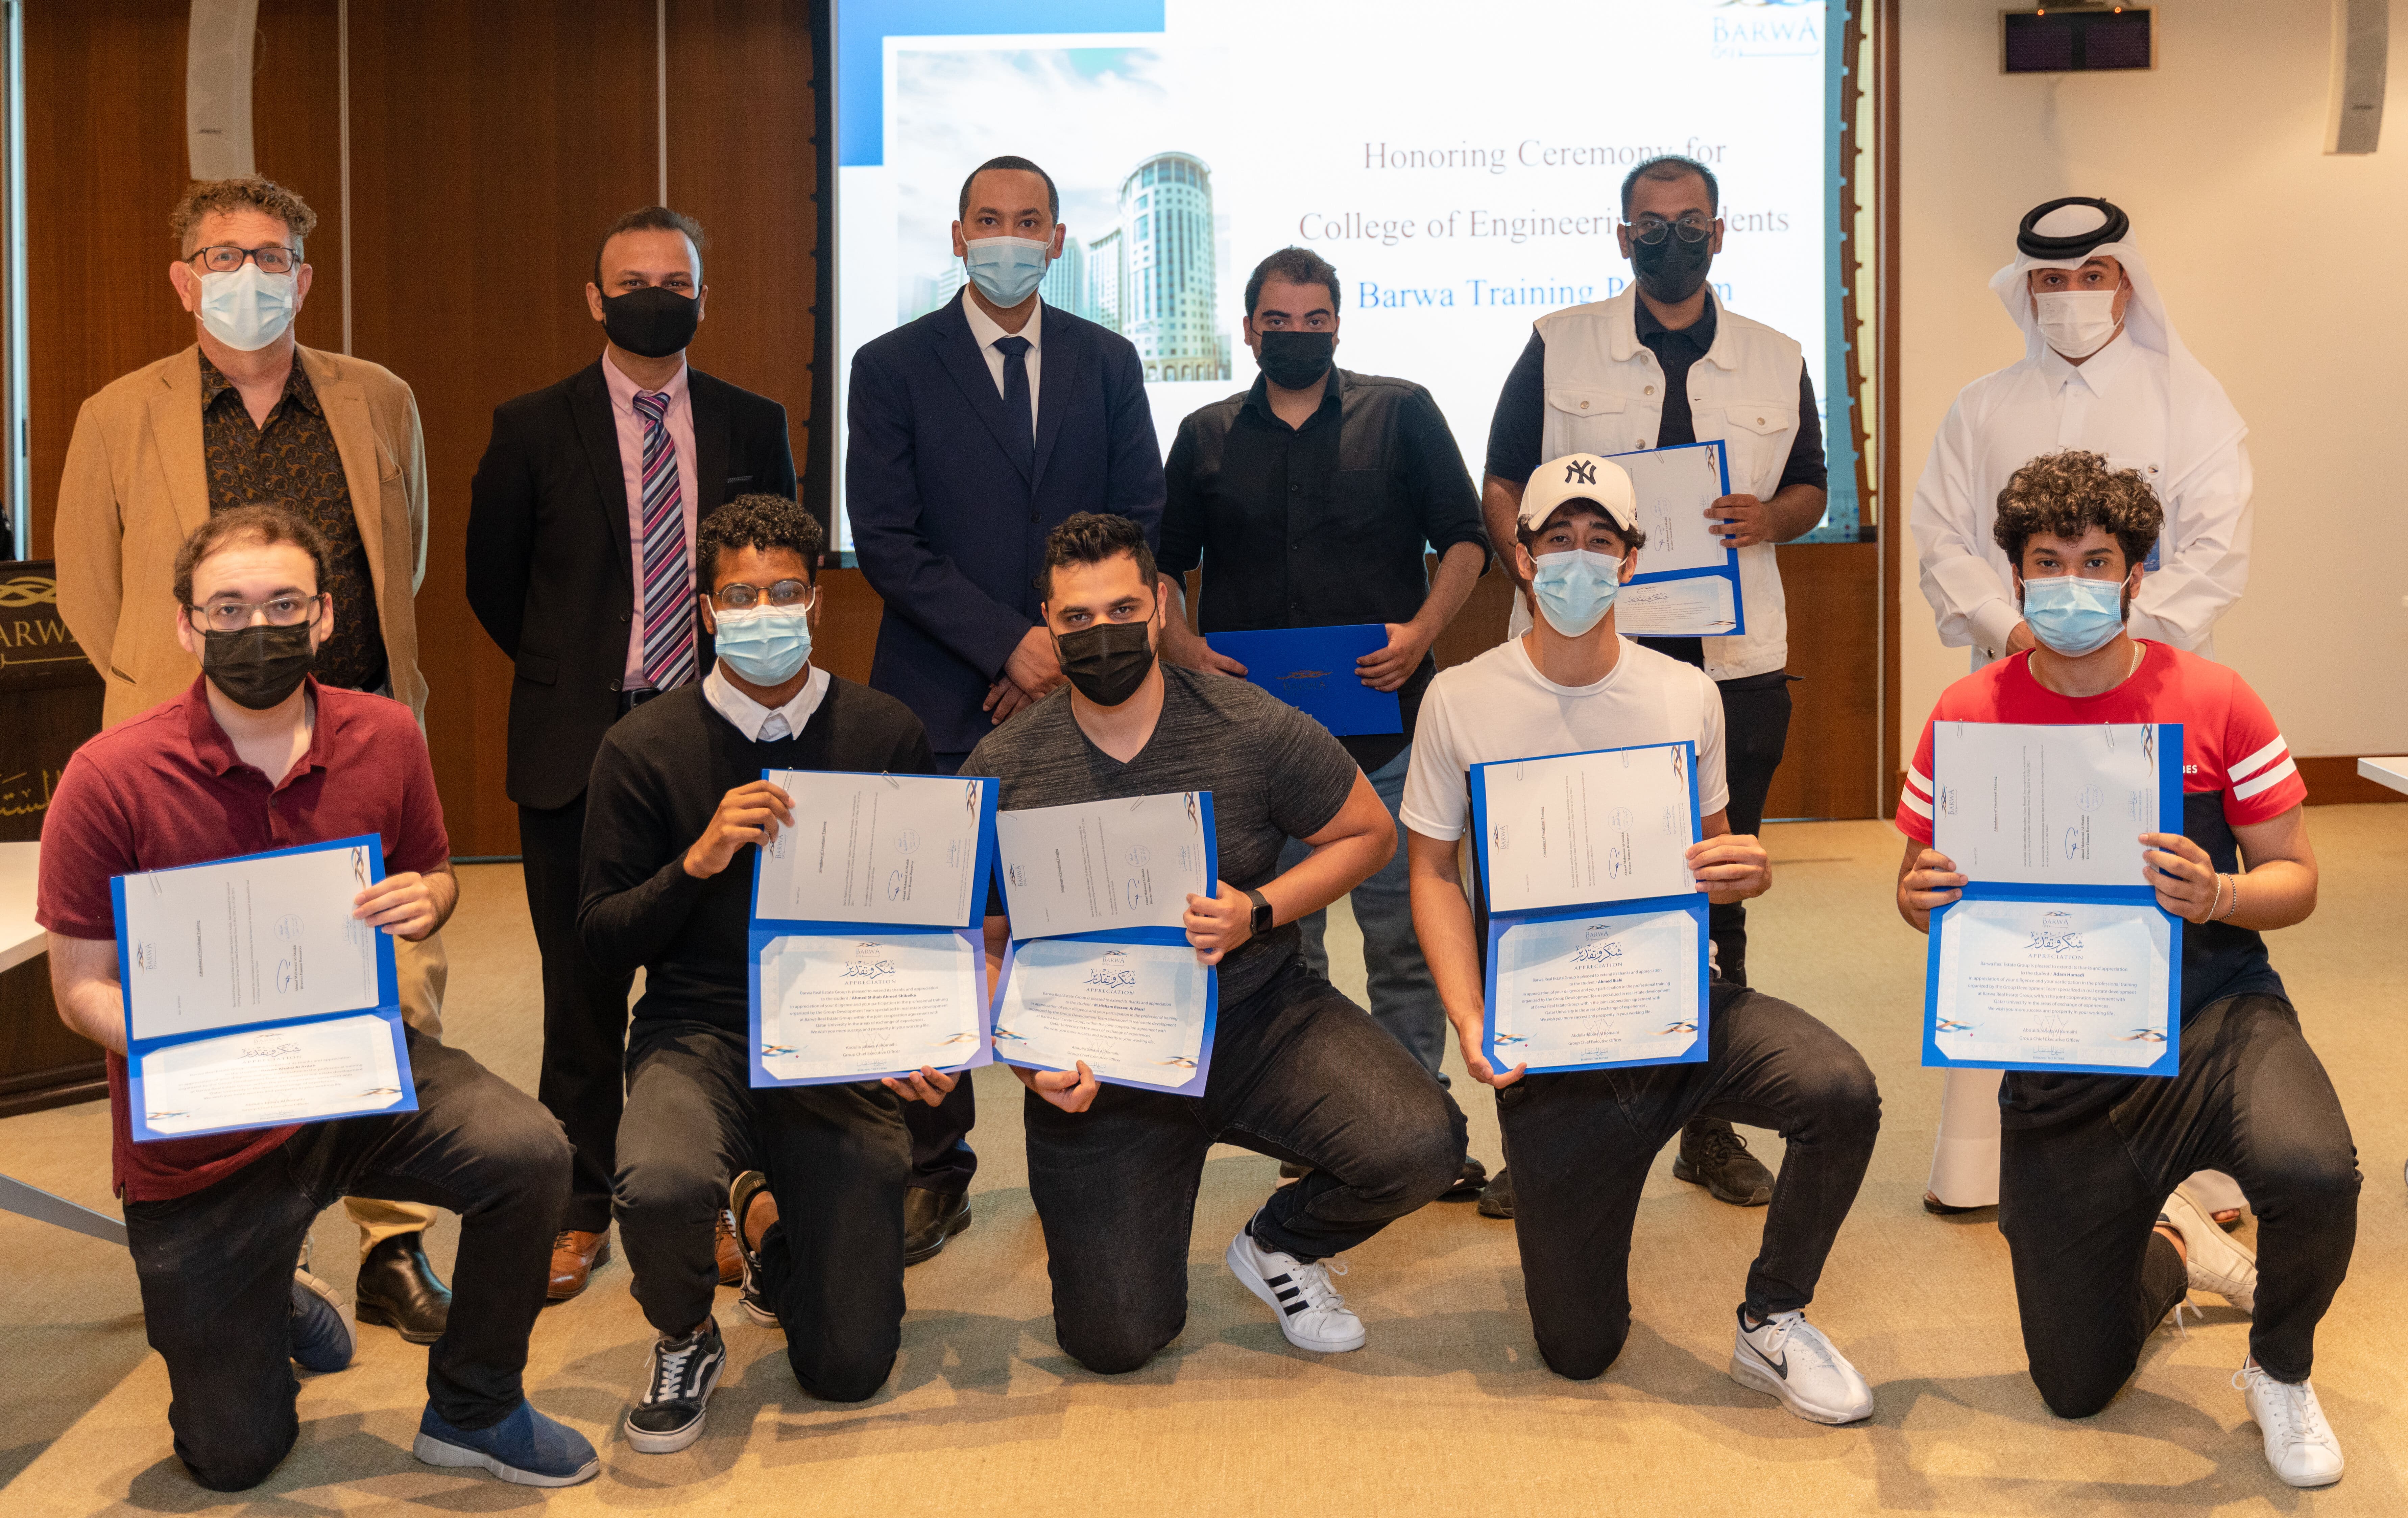 Barwa Real Estate honors students of the College of Engineering who completed the second vocational and field training program